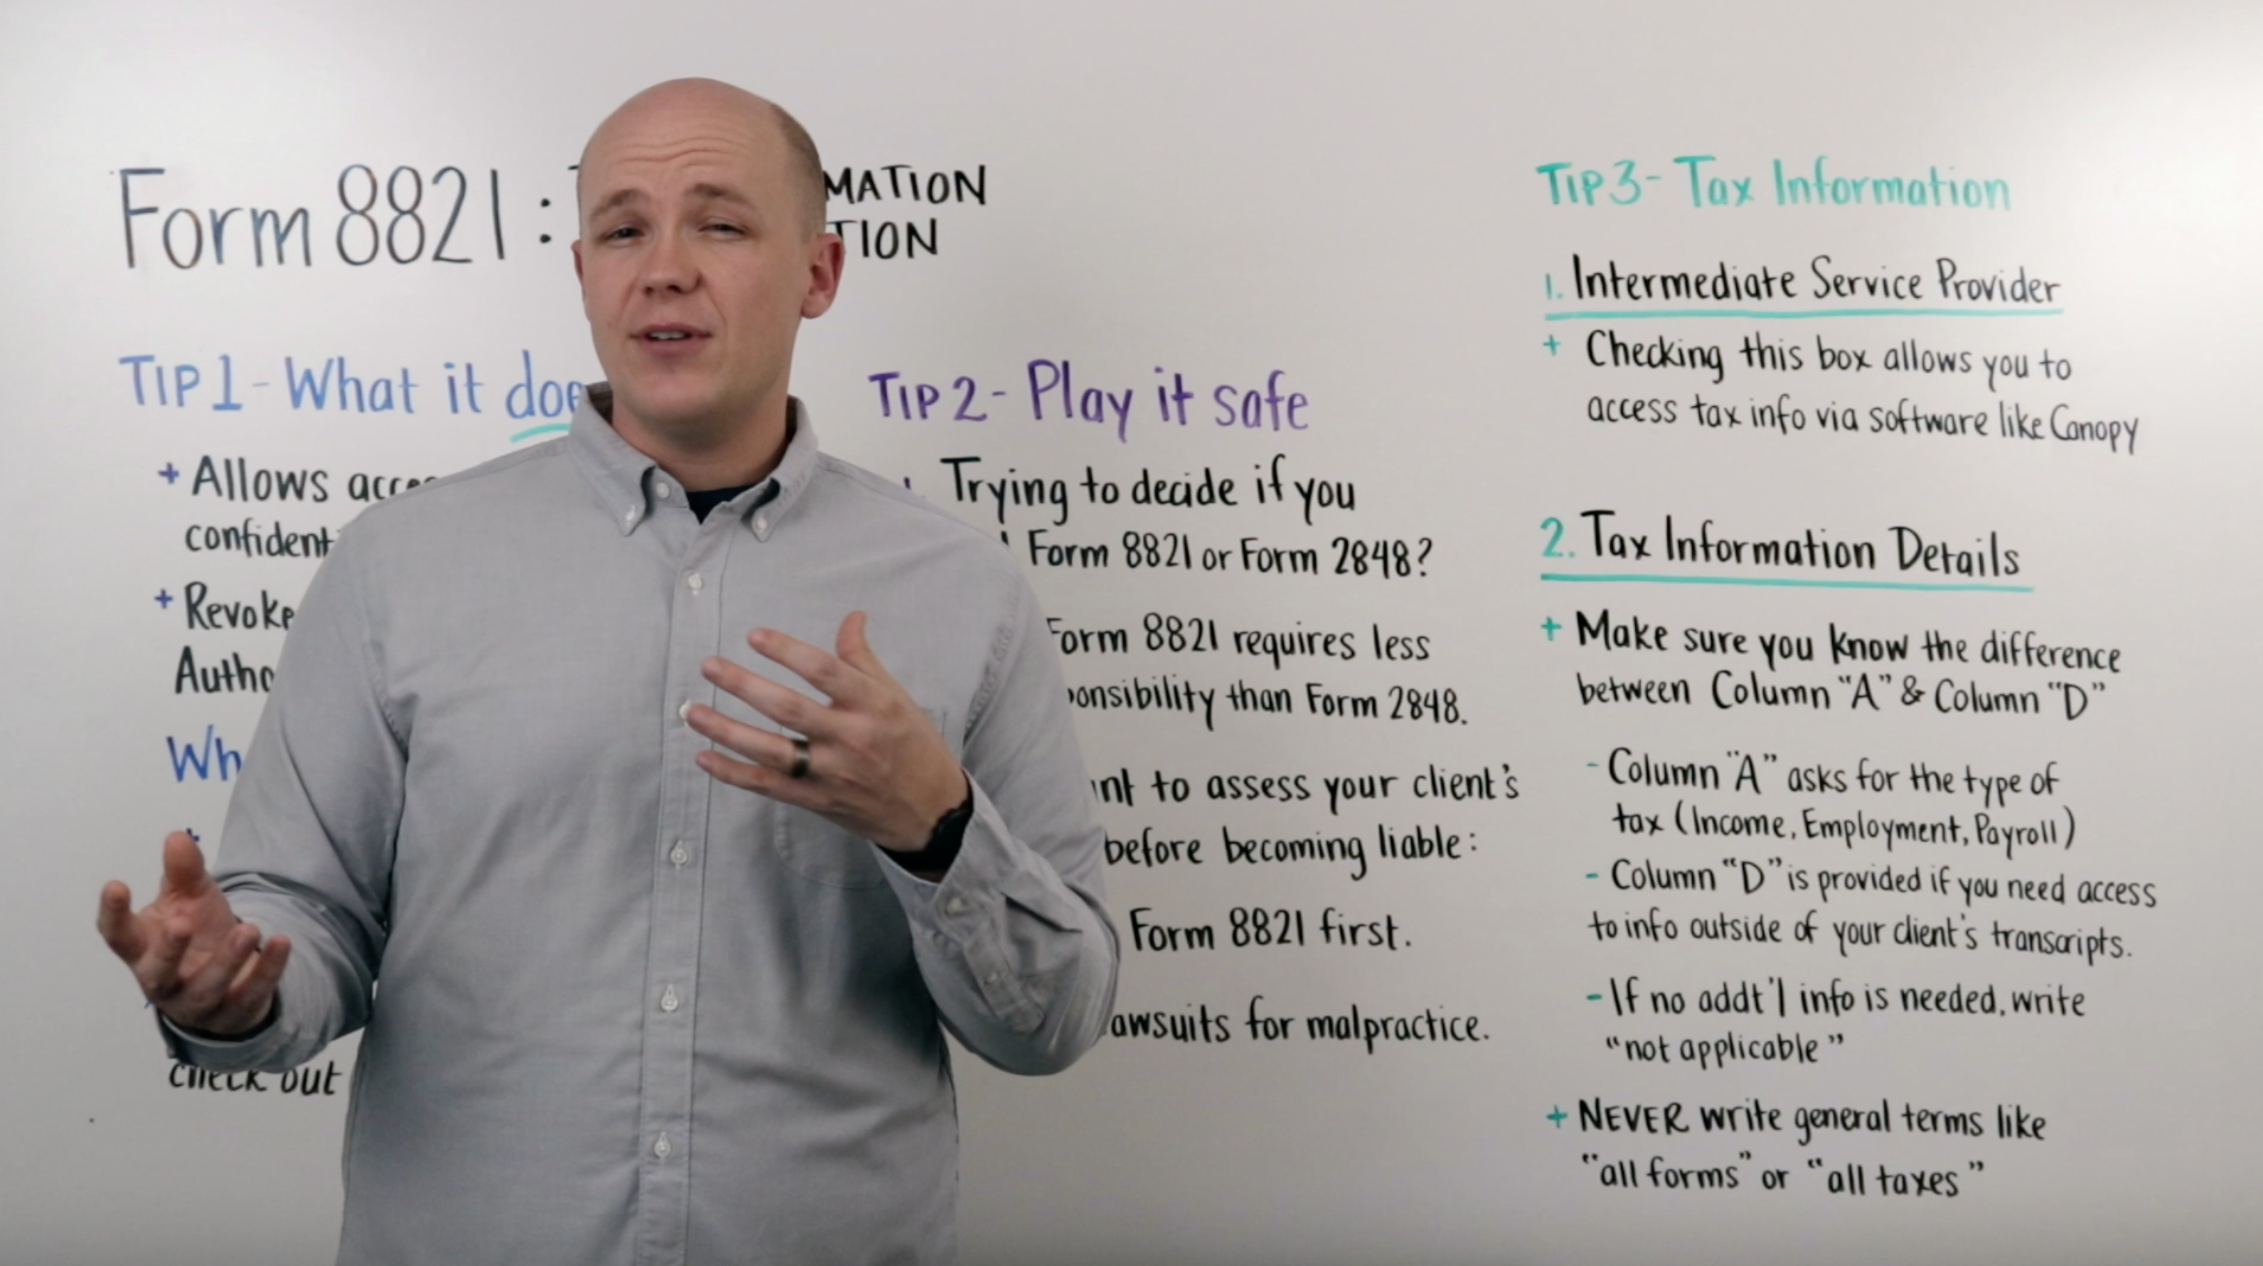 Video: Tips for Filling Out IRS Form 8821